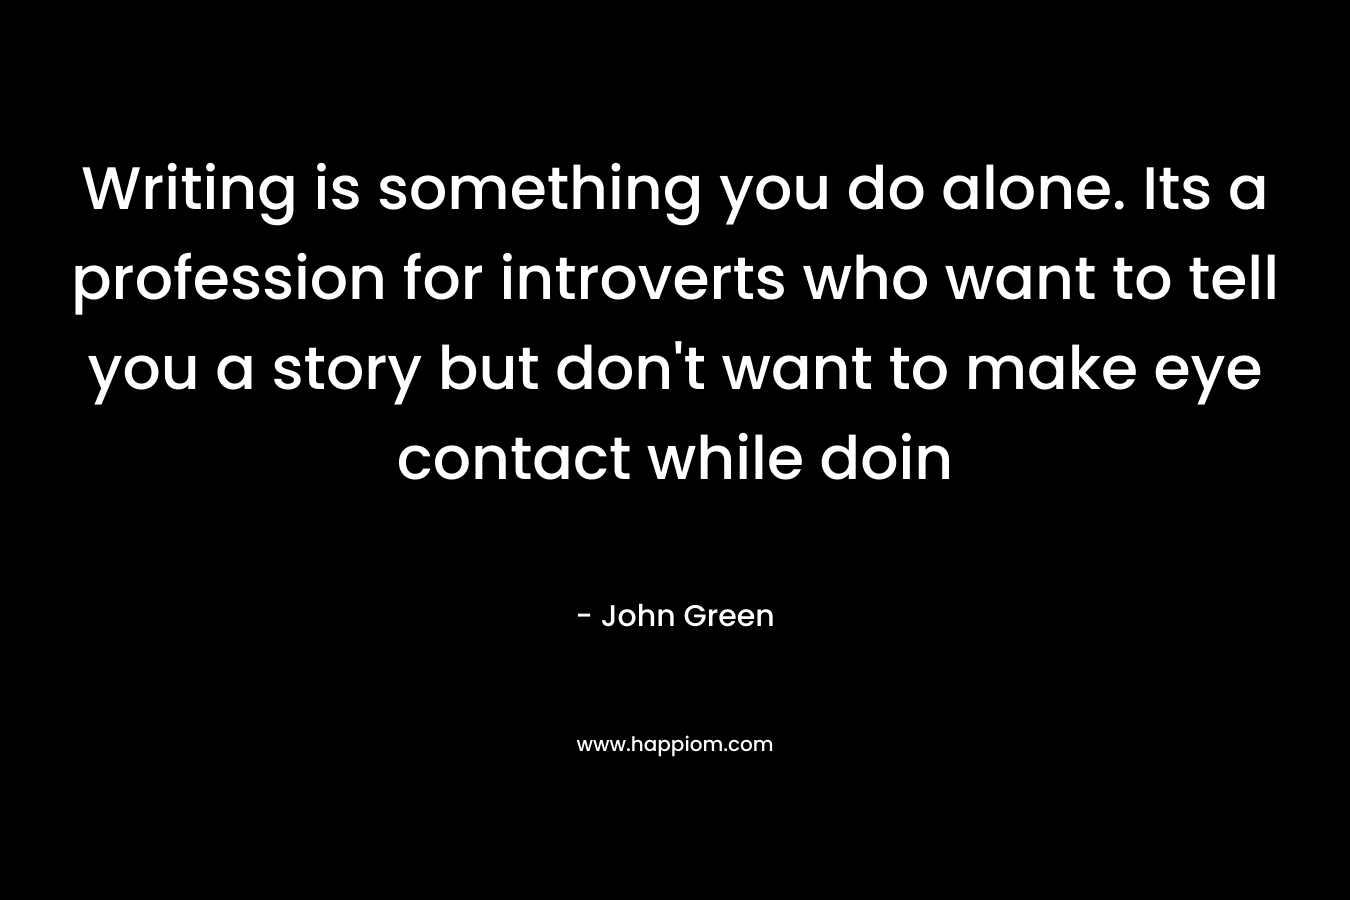 Writing is something you do alone. Its a profession for introverts who want to tell you a story but don’t want to make eye contact while doin – John Green